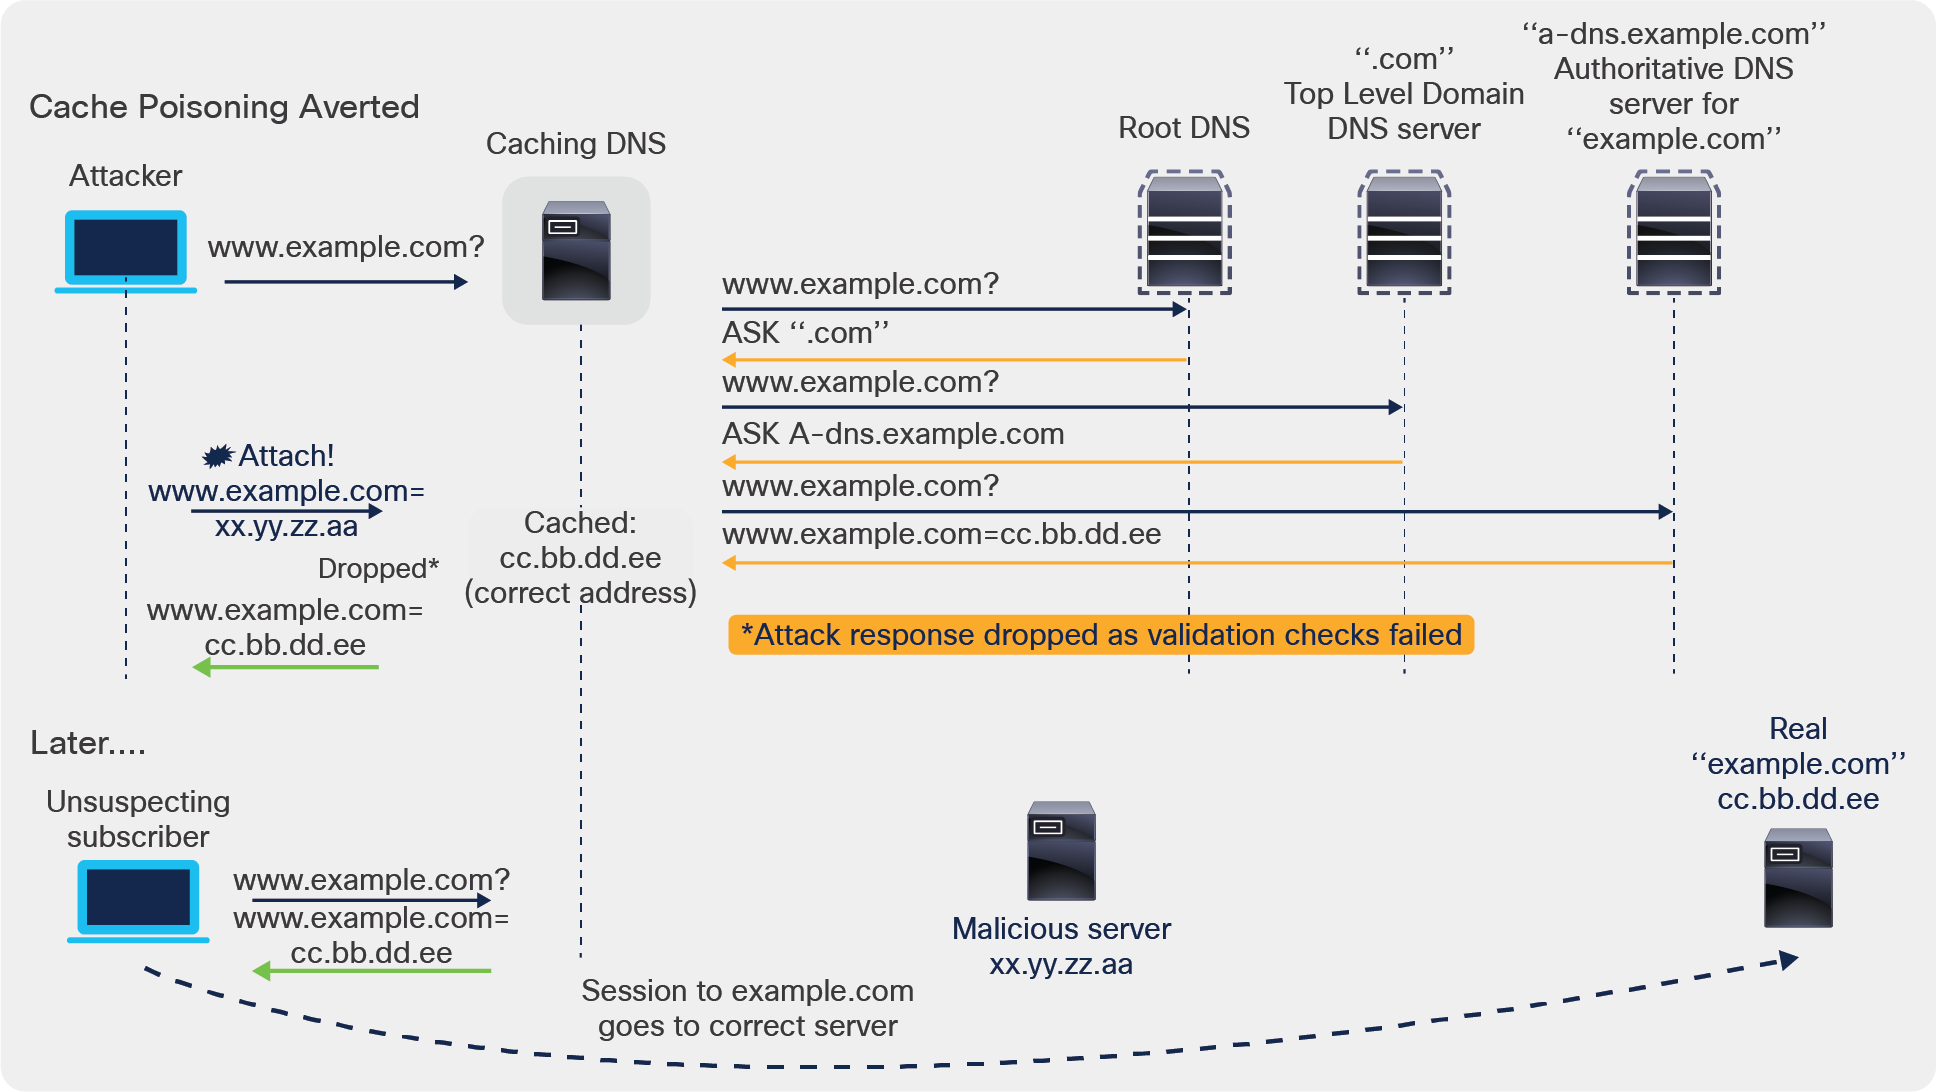 DNS cache poisoning - Averting the attack